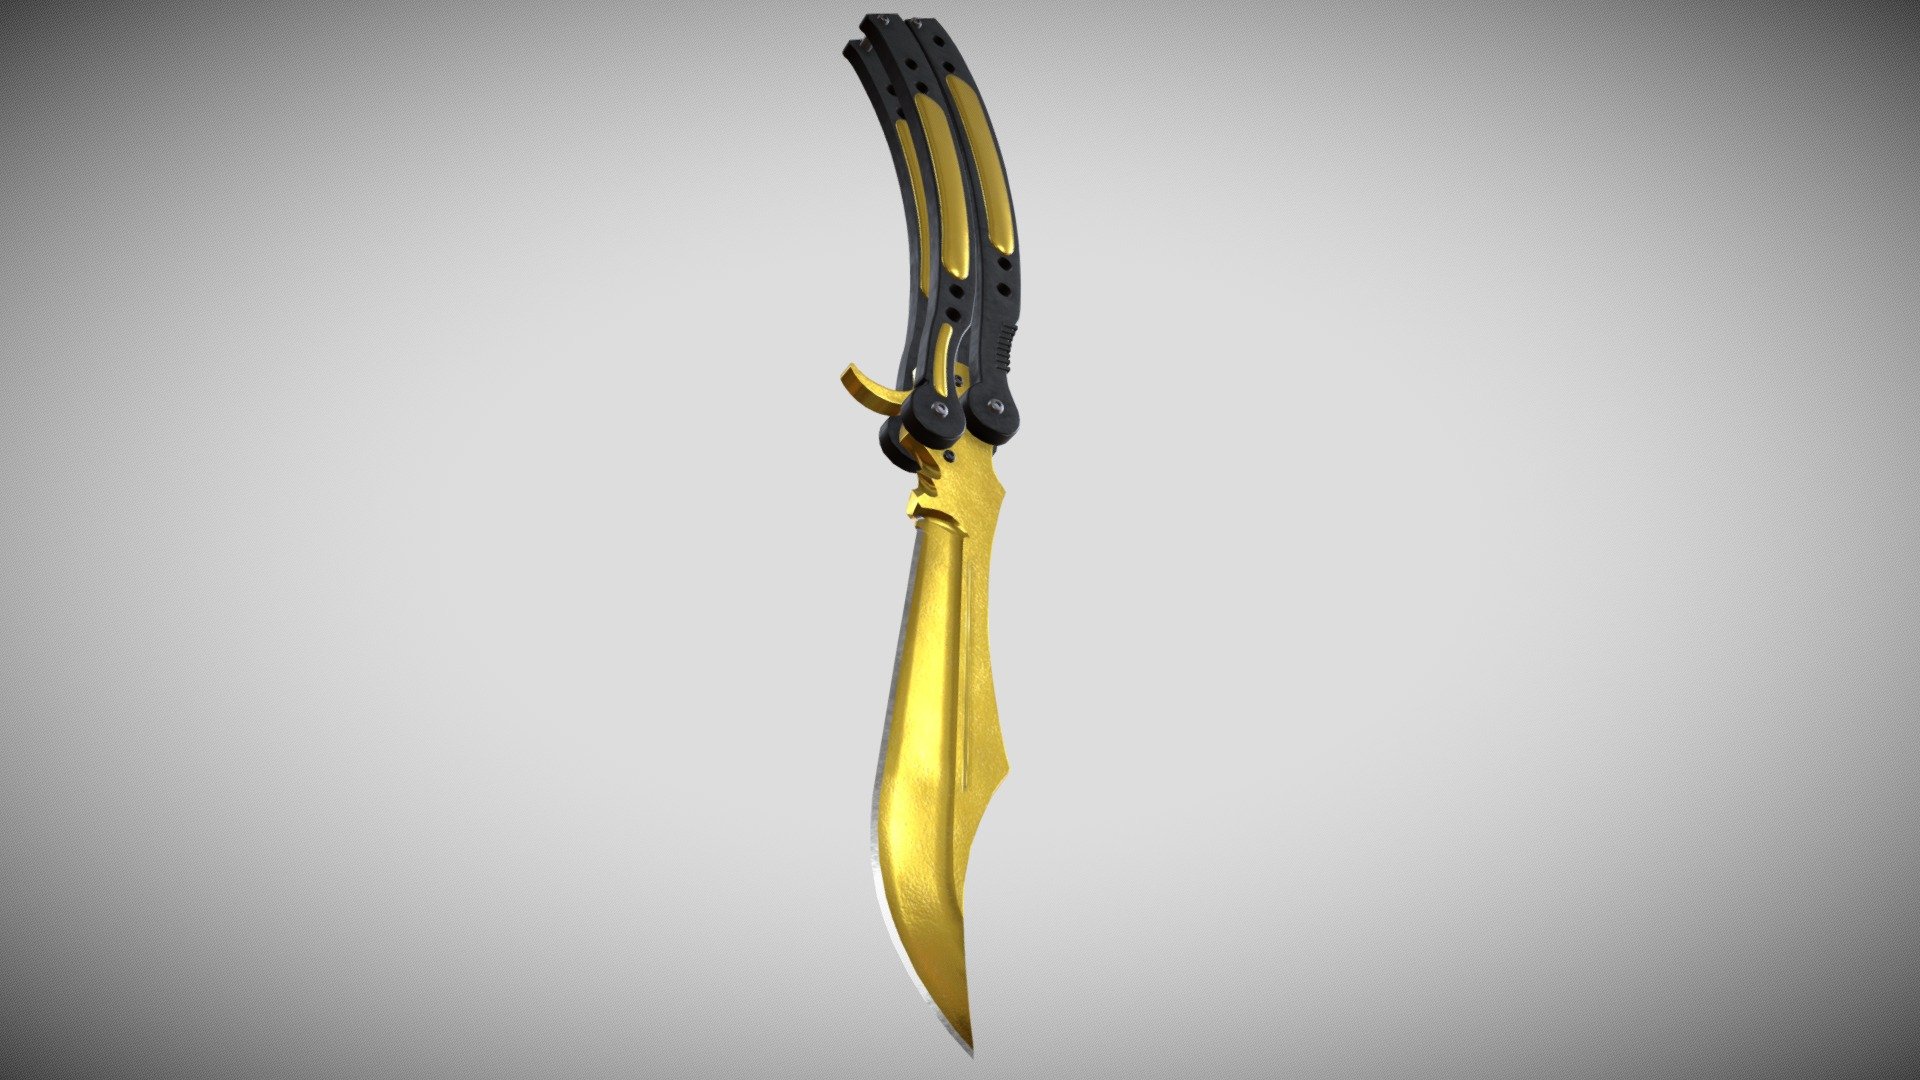 Butterfly Knife from CS:GO with gold pattern Model made in Autodesk MAYA, textured and rendered in Substance Painter - Butterfly Knife Gold - Buy Royalty Free 3D model by P7PO (@PiPo07) 3d model